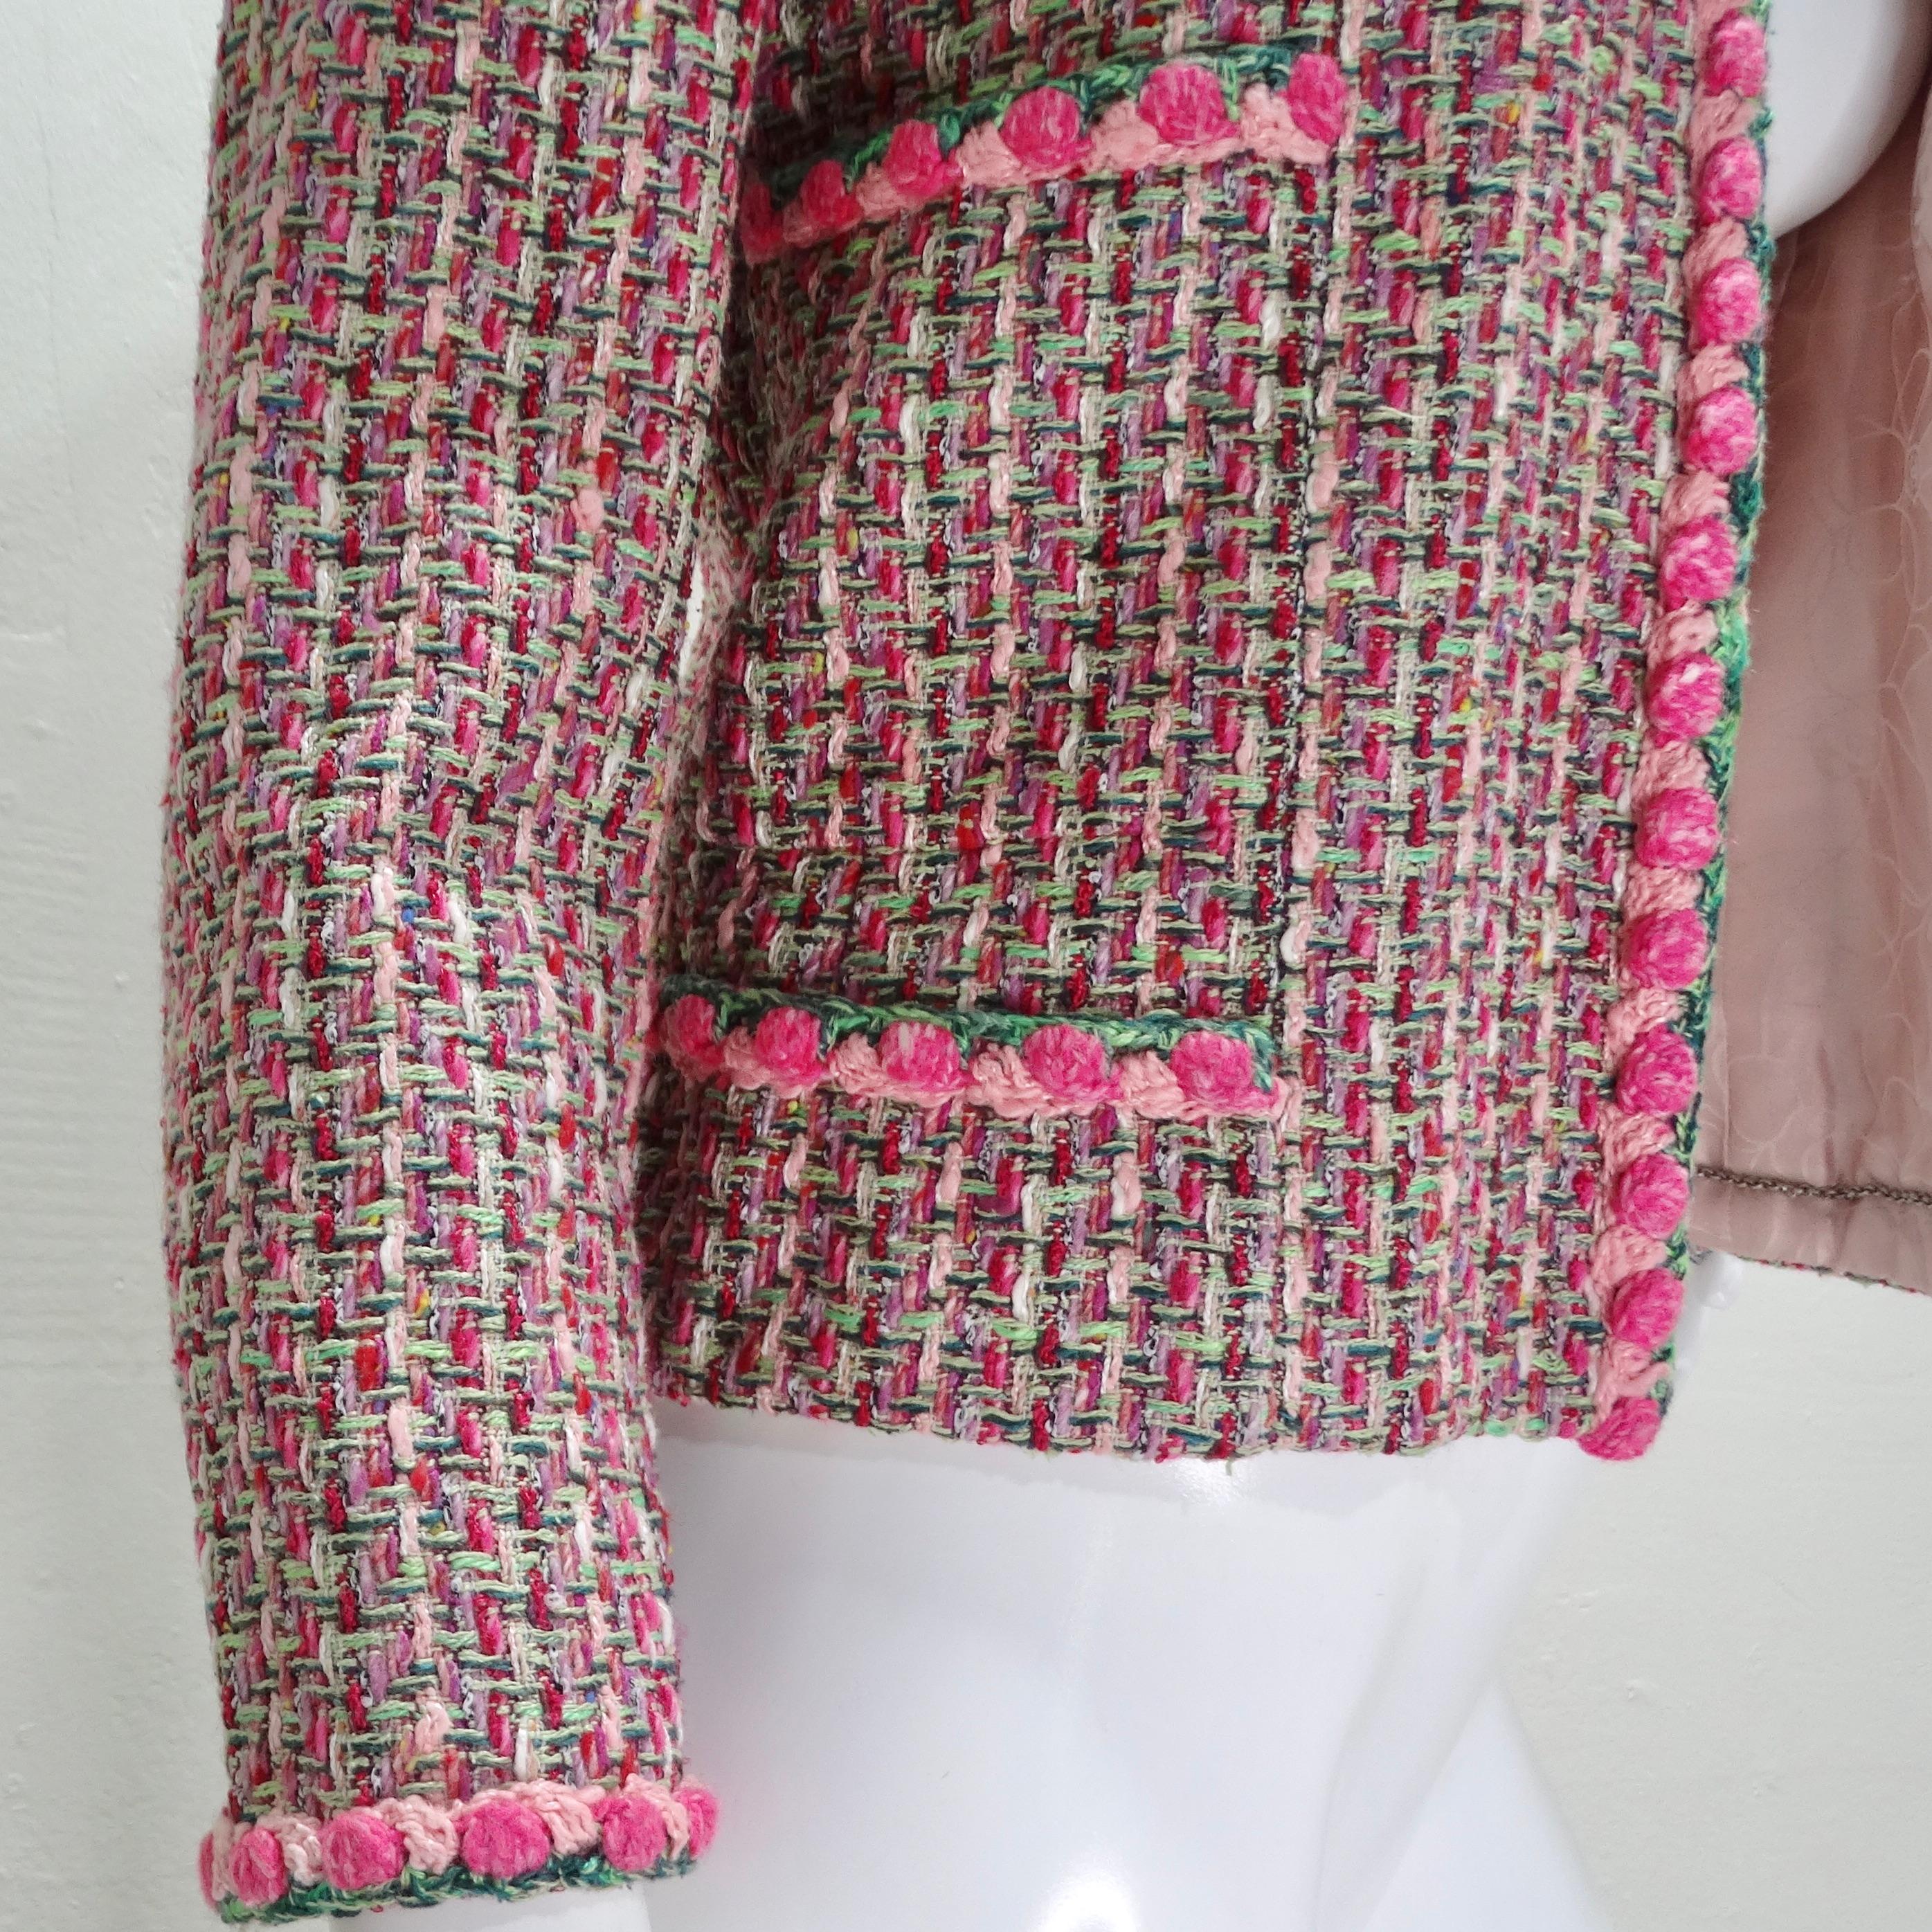 Chanel 2002 Pink Tweed Evening Jacket In Excellent Condition For Sale In Scottsdale, AZ